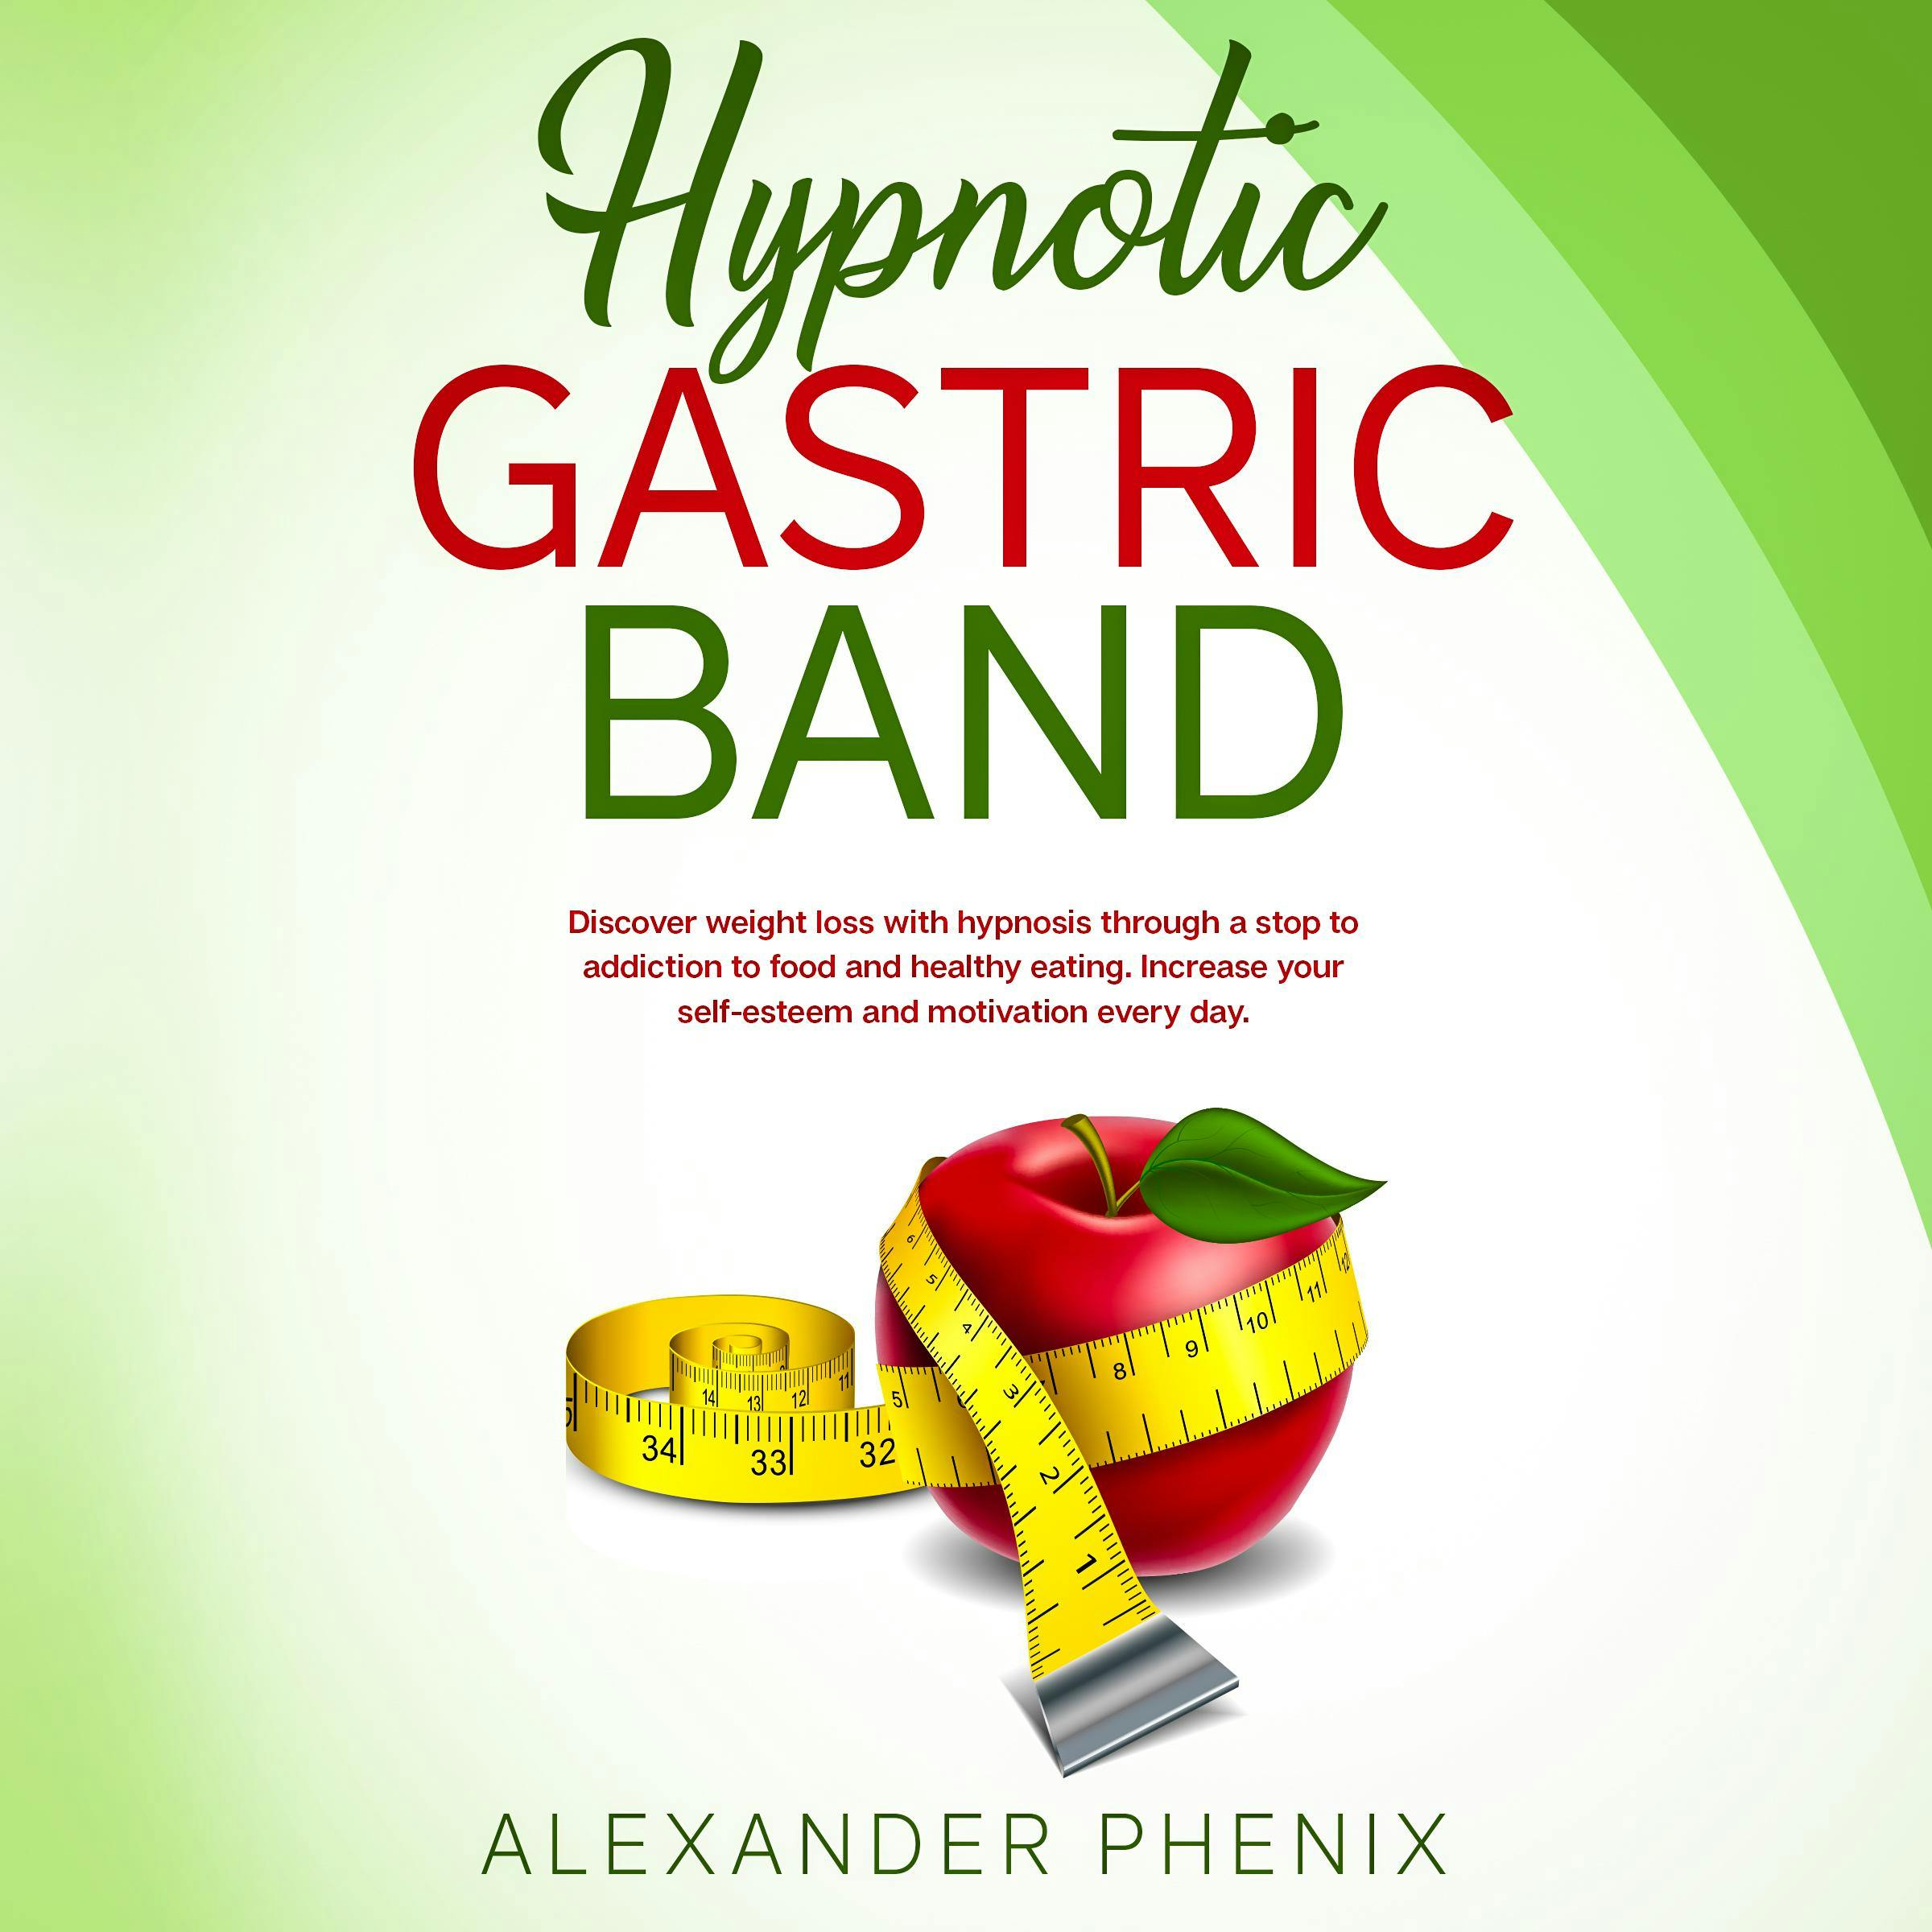 Hypnotic Gastric Band: Discover weight loss with hypnosis through a stop to addiction to food and healthy eating. Increase your self-esteem and motivation every day. - Alexander Phenix